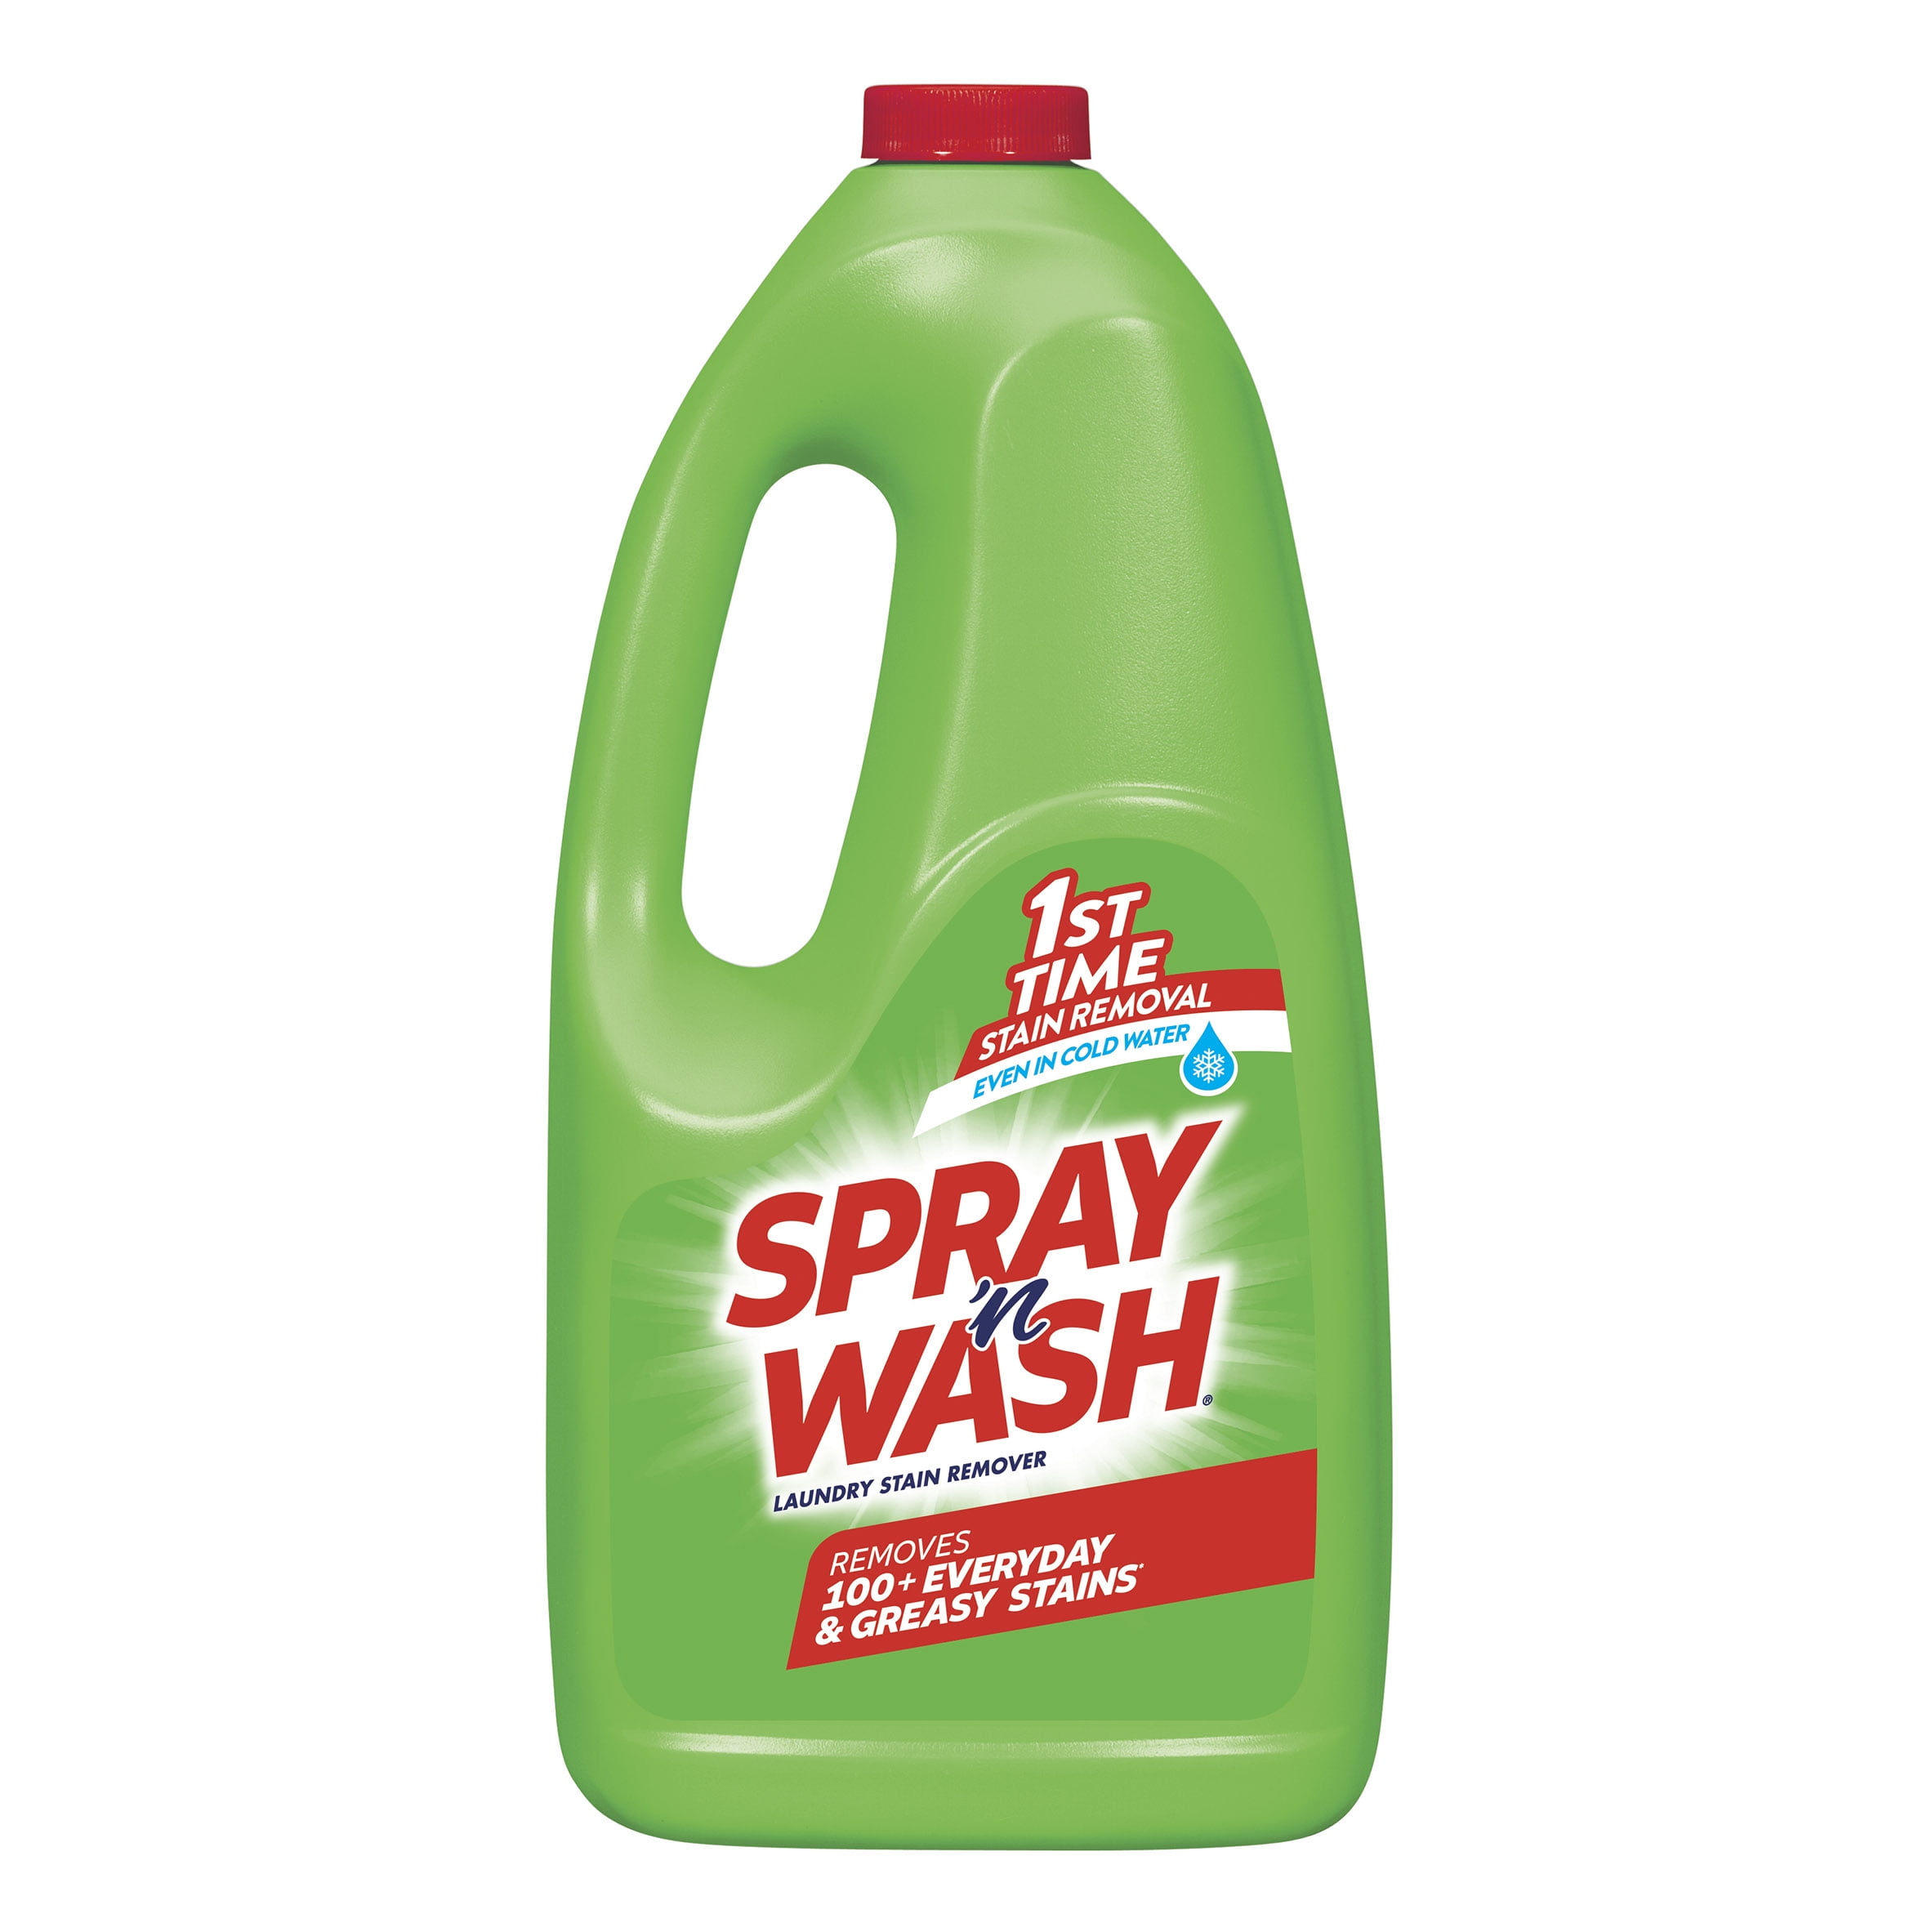 Spray 'n Wash Pre-Treat Laundry Stain Remover Refill, 60oz Bottle